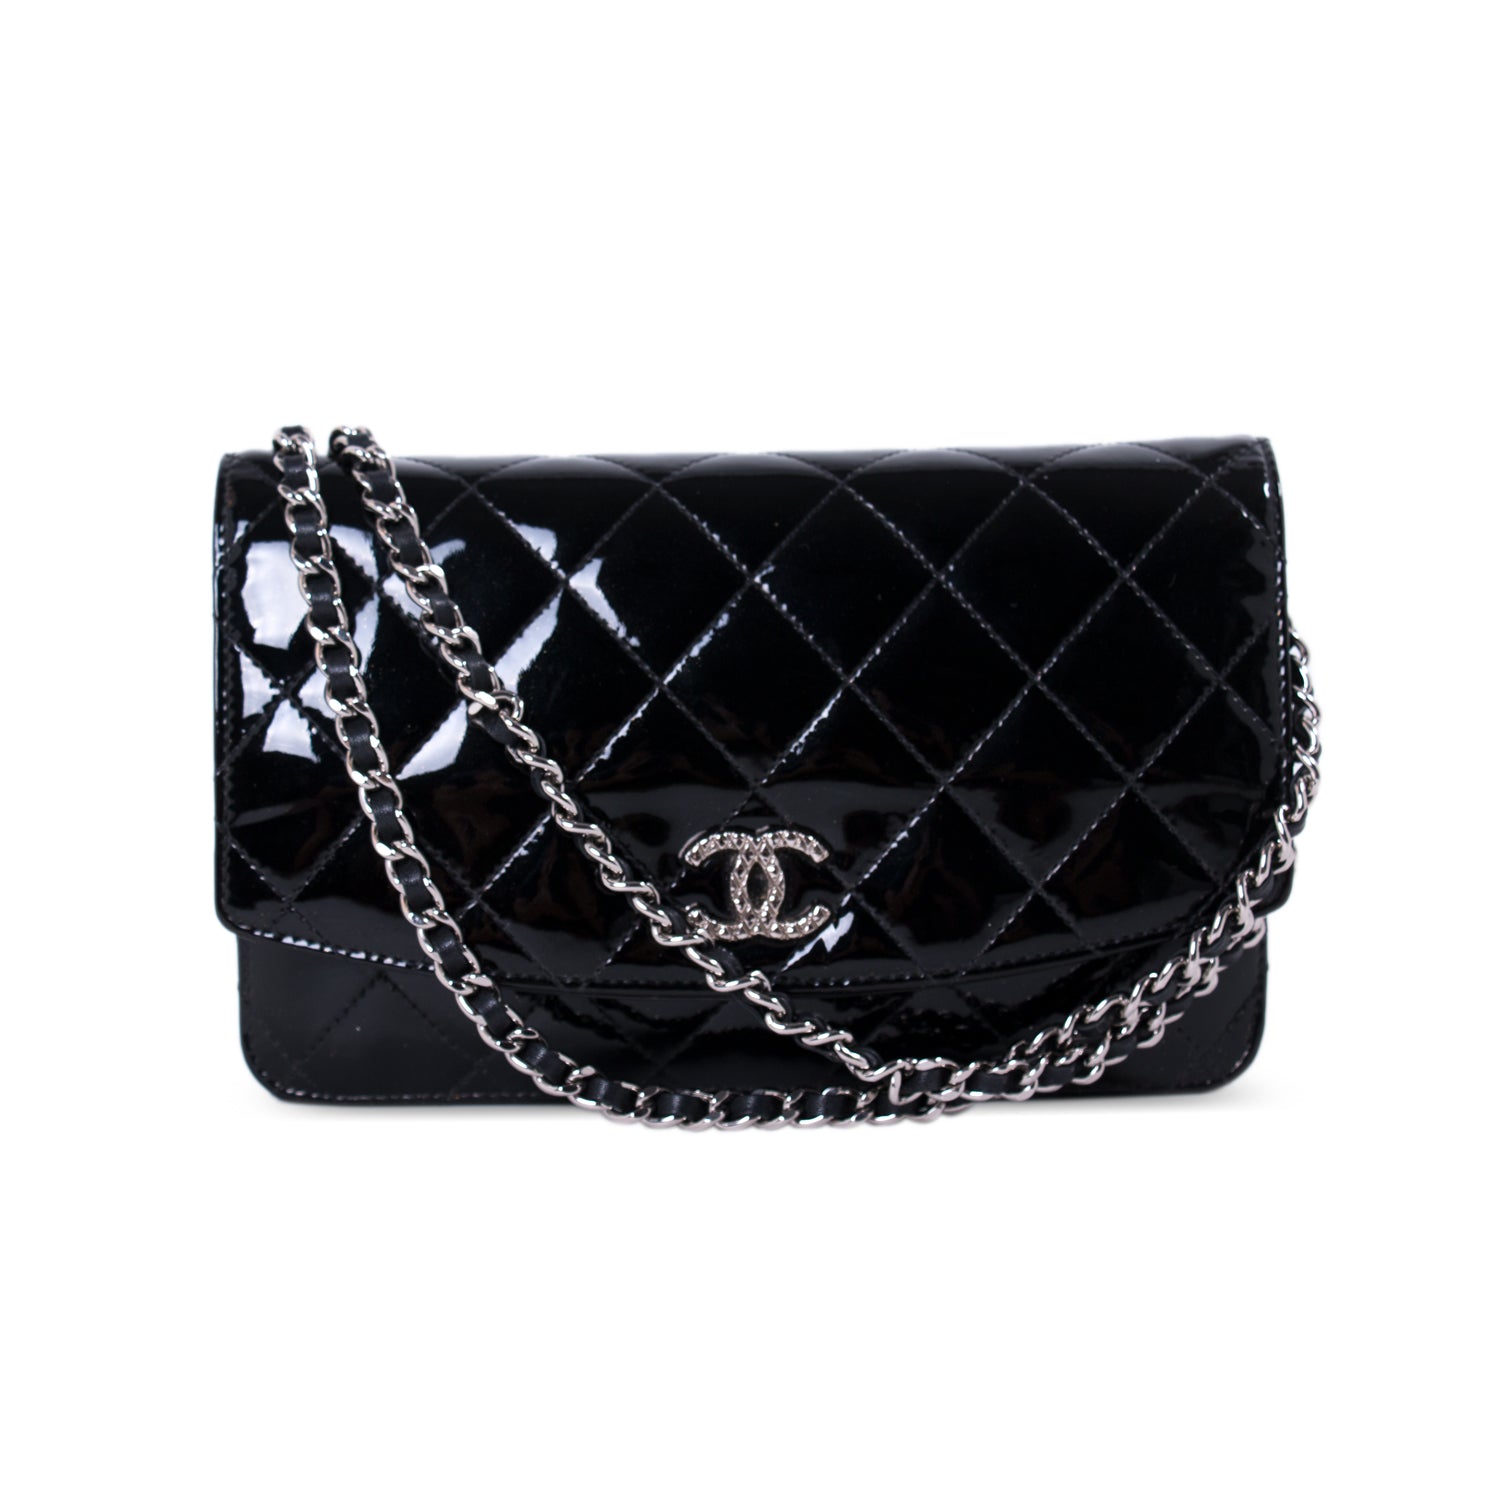 Chanel Patent Leather Wallet on Chain